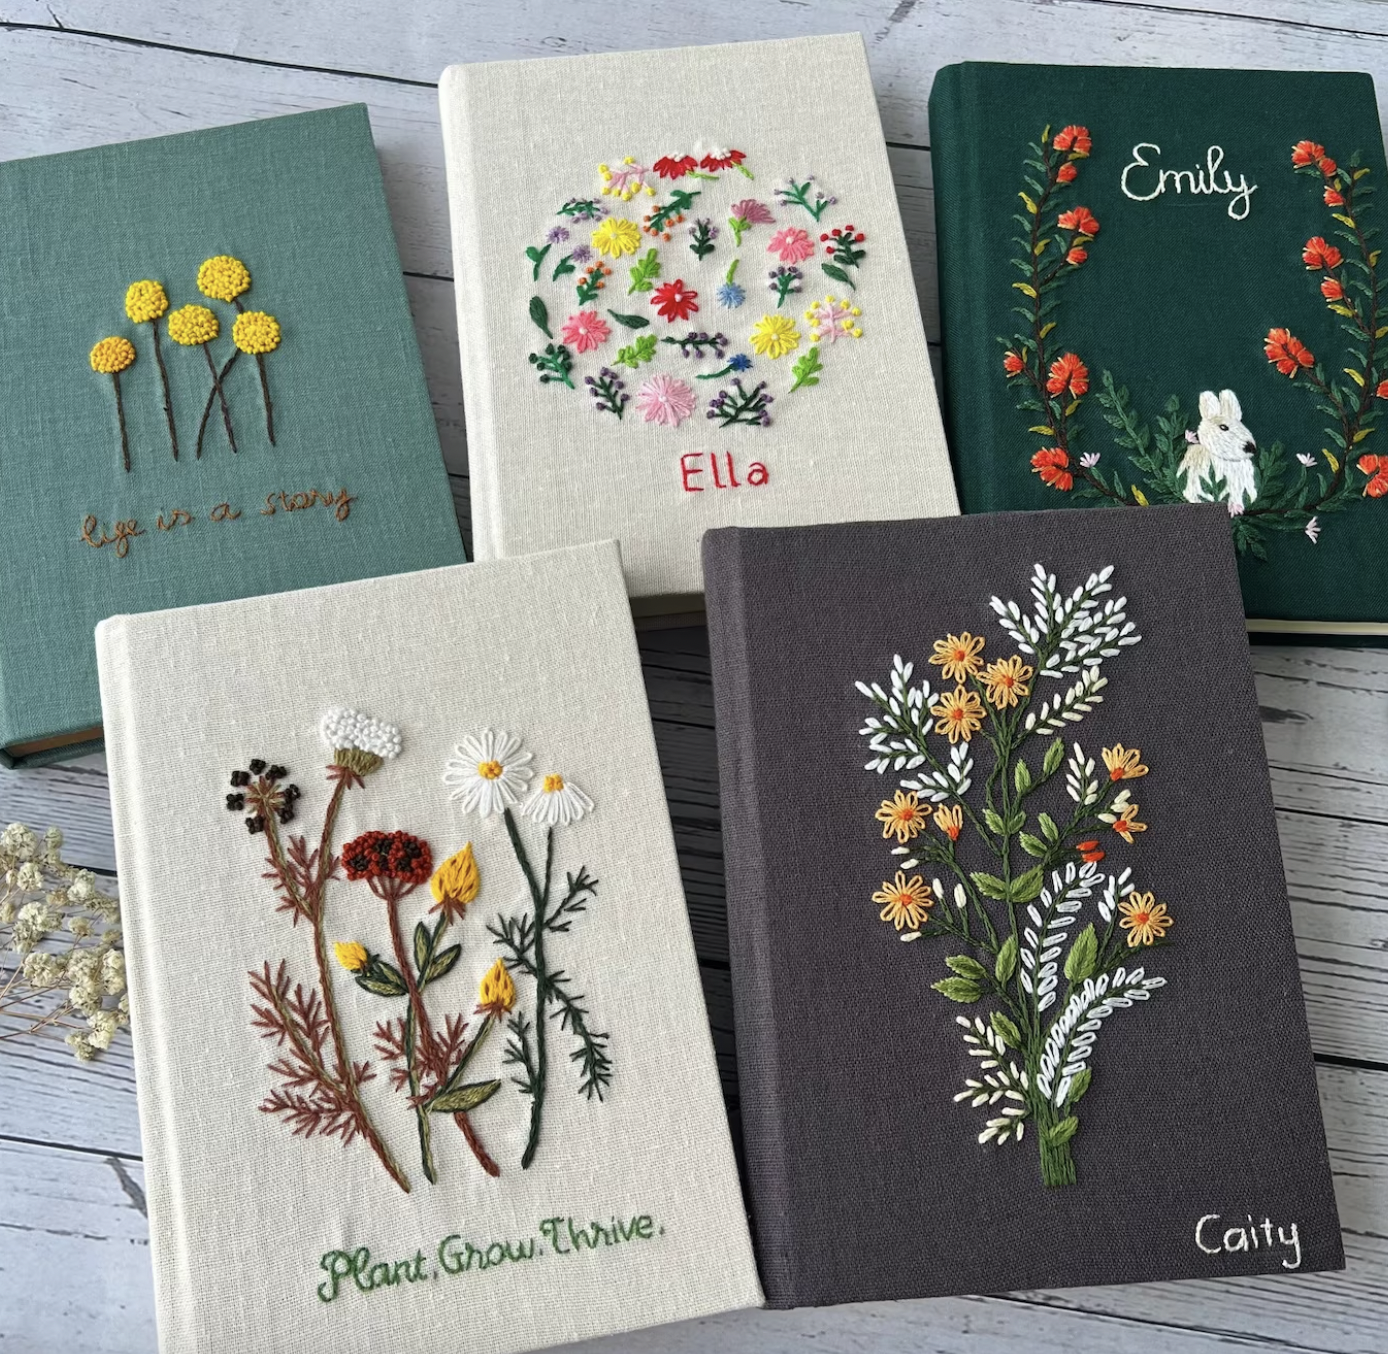 Image of five linen-covered notebooks with hand-embroidered floral designs